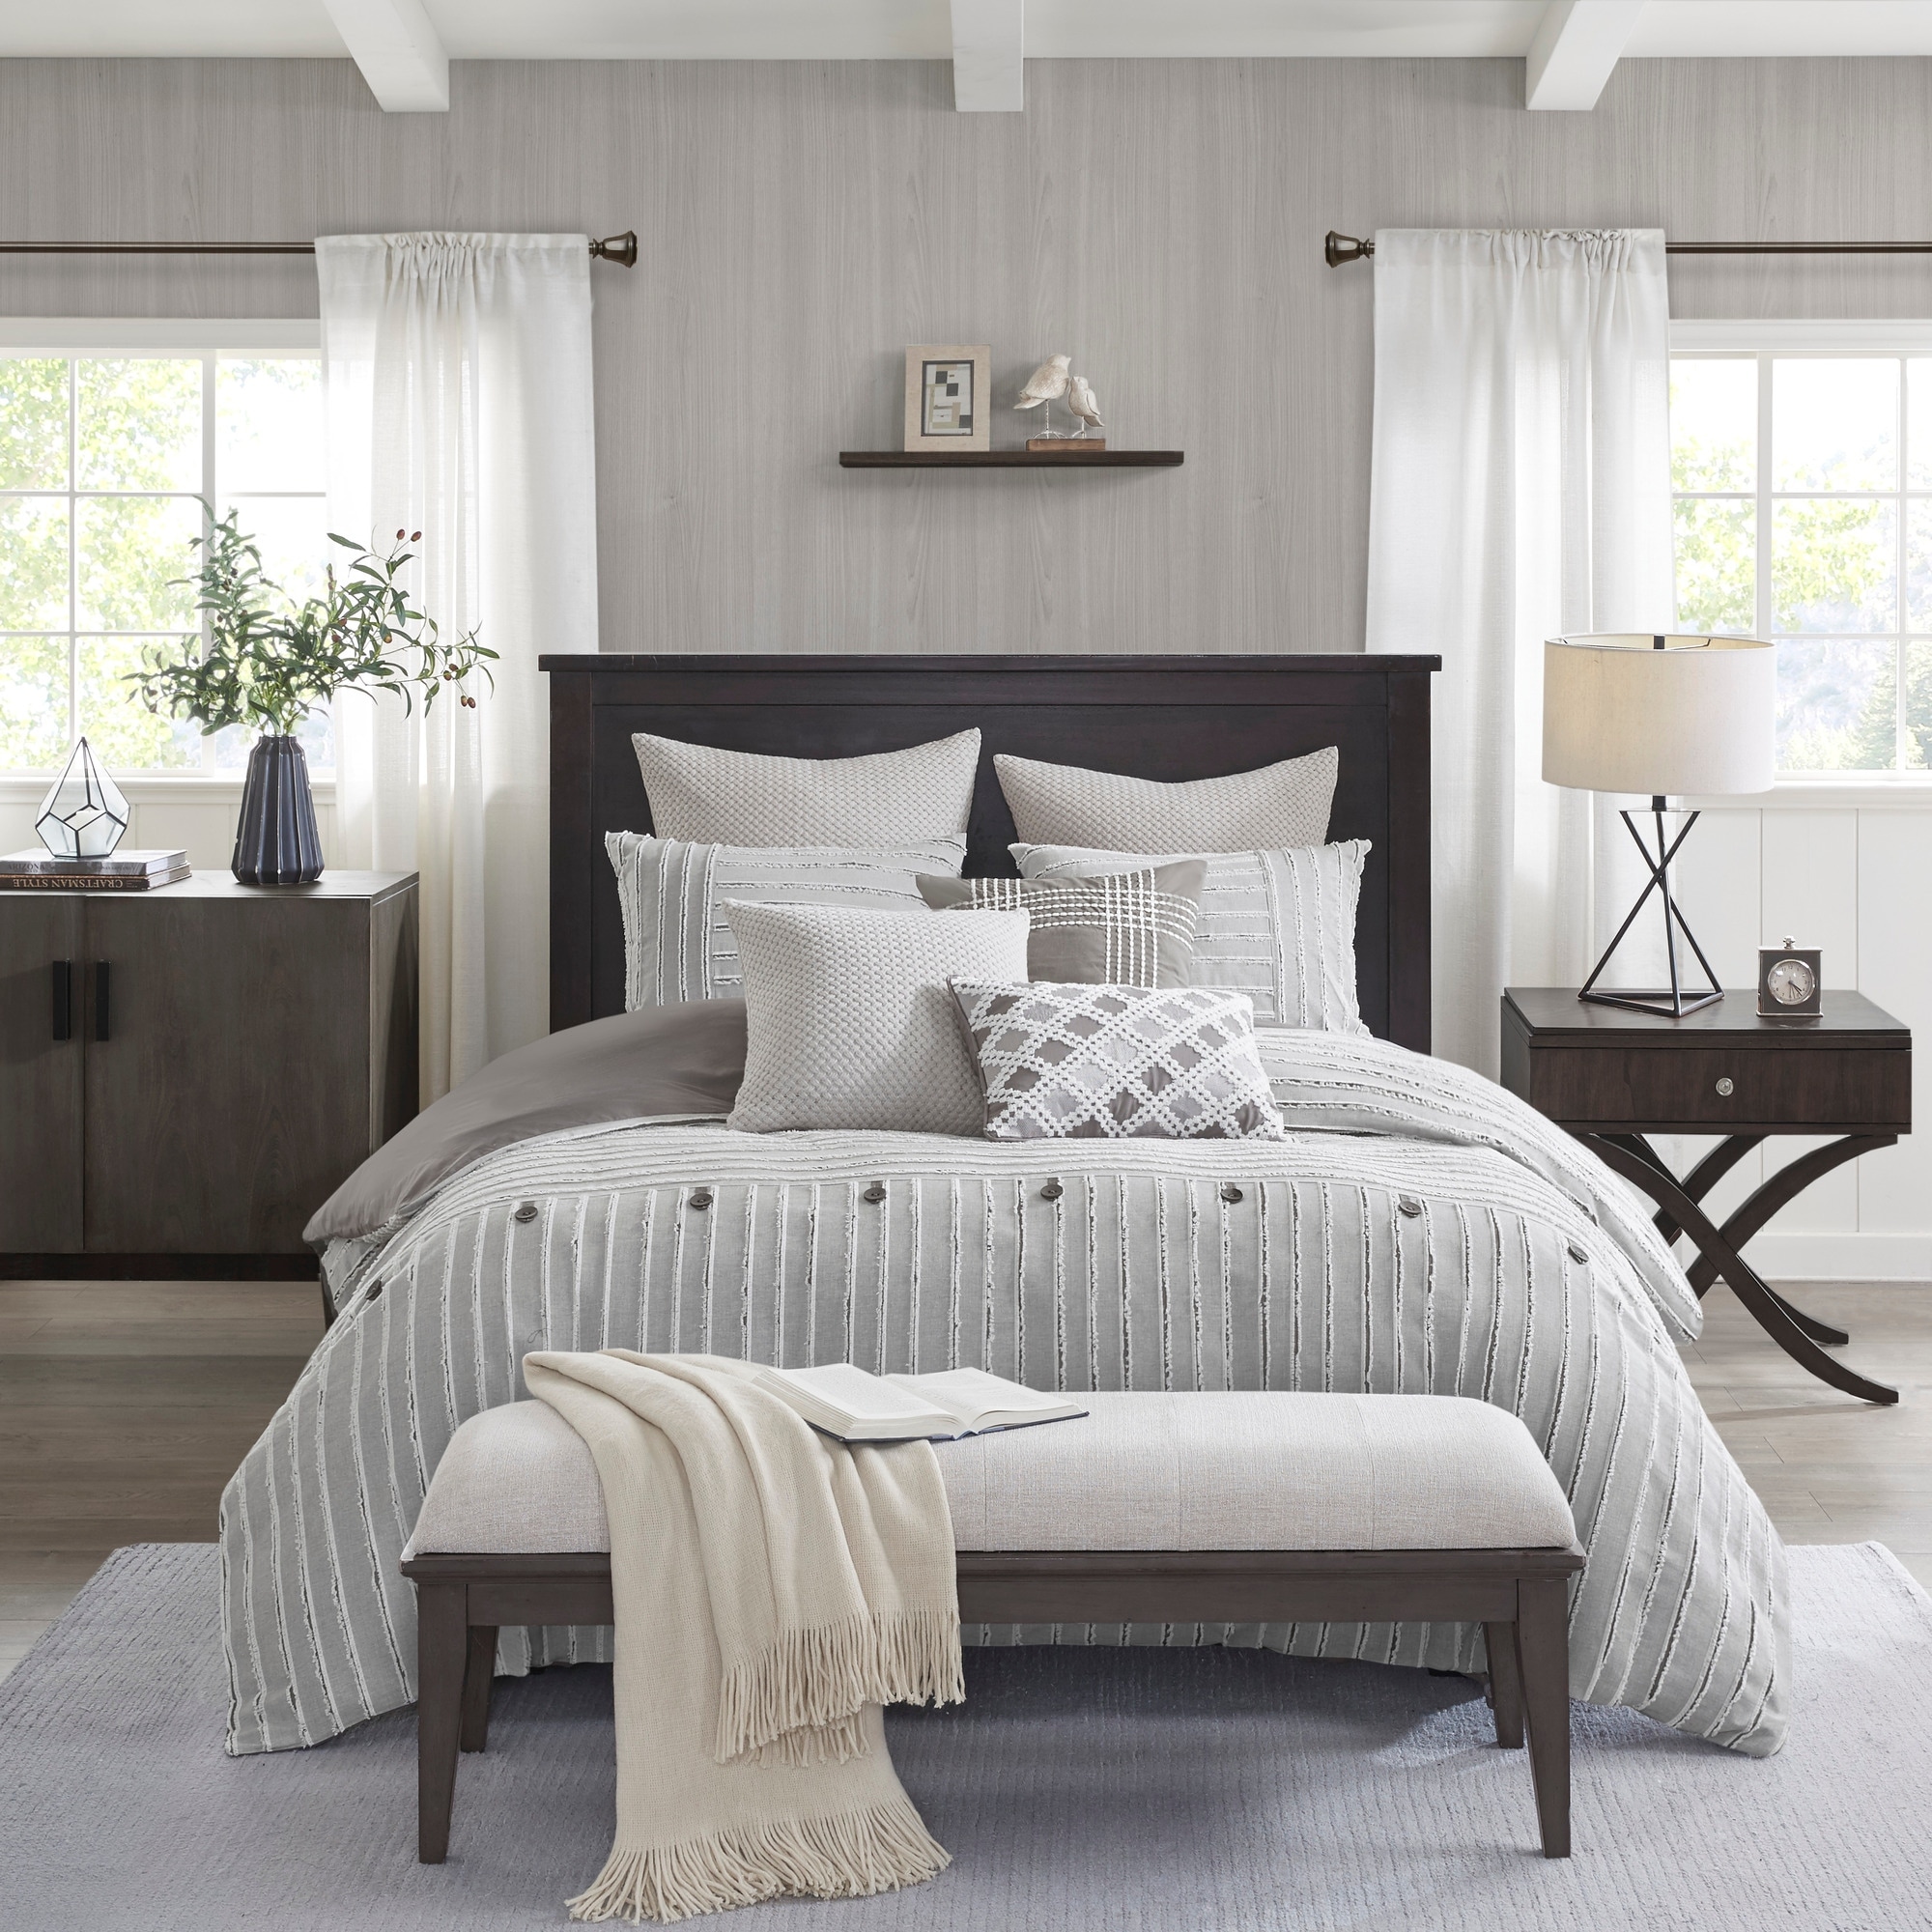 King Size Comforters and Sets - Bed Bath & Beyond